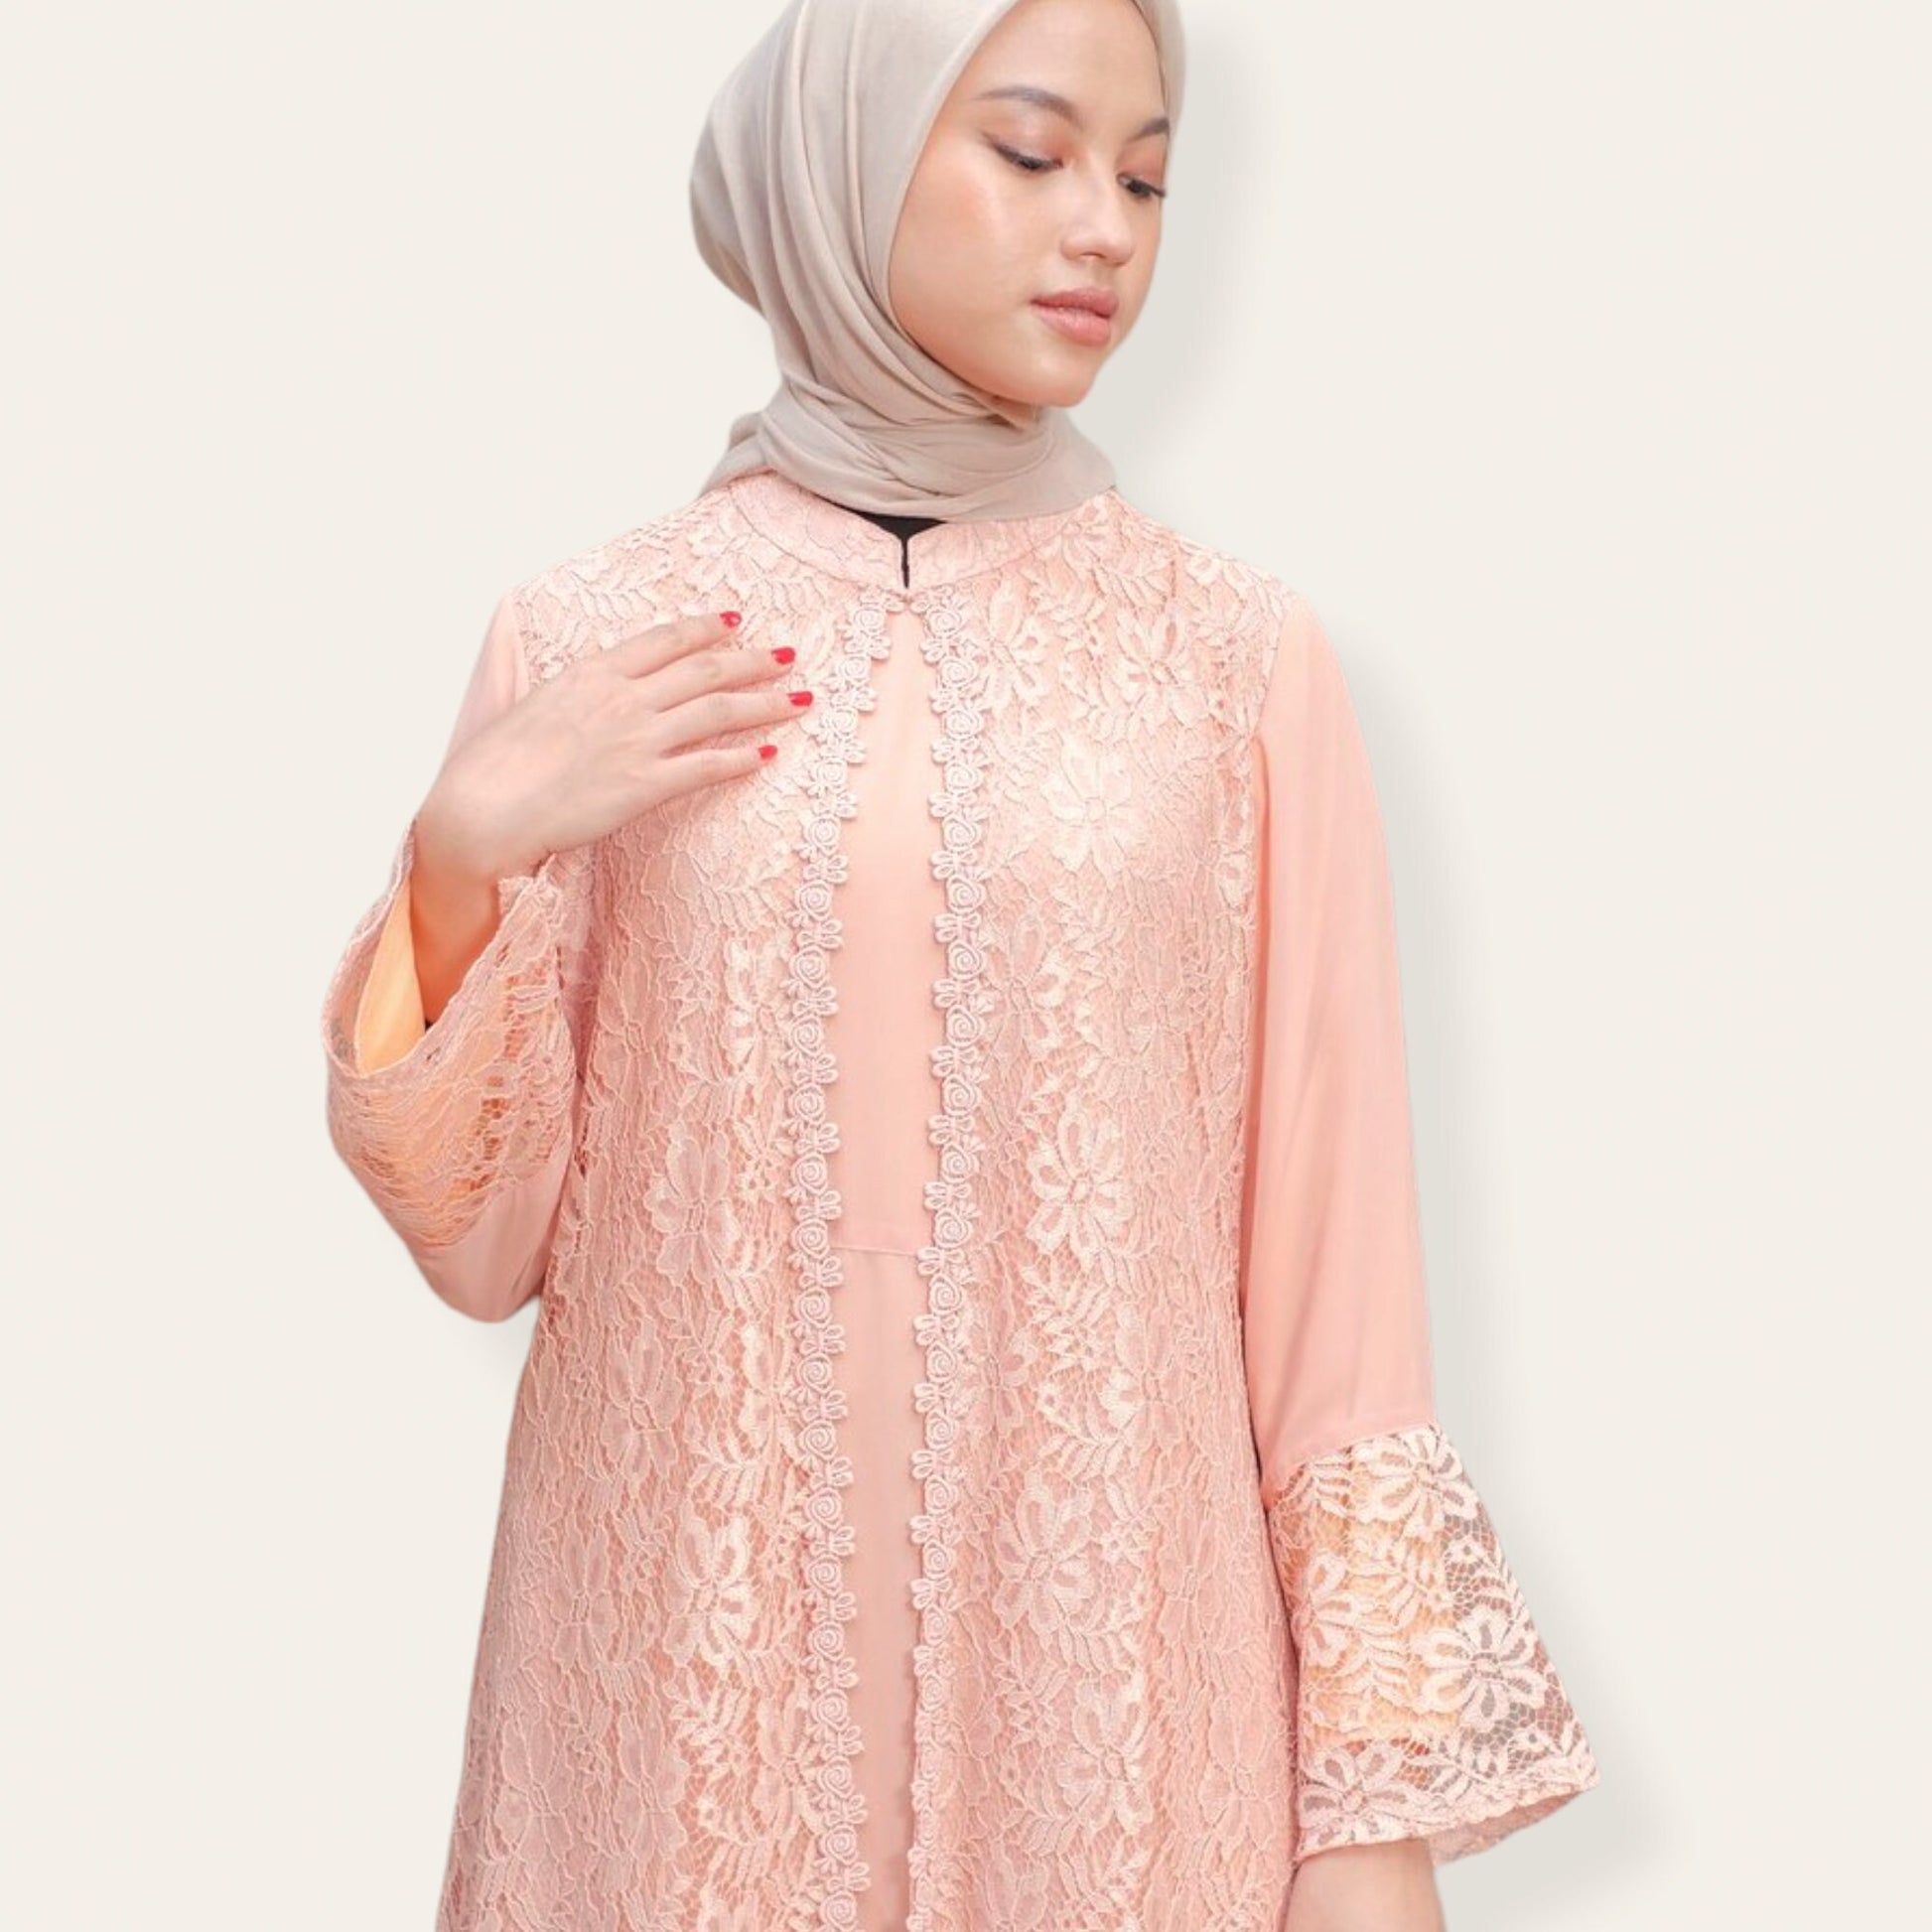 Peach abaya dress with brocade feature on top and zipper at back